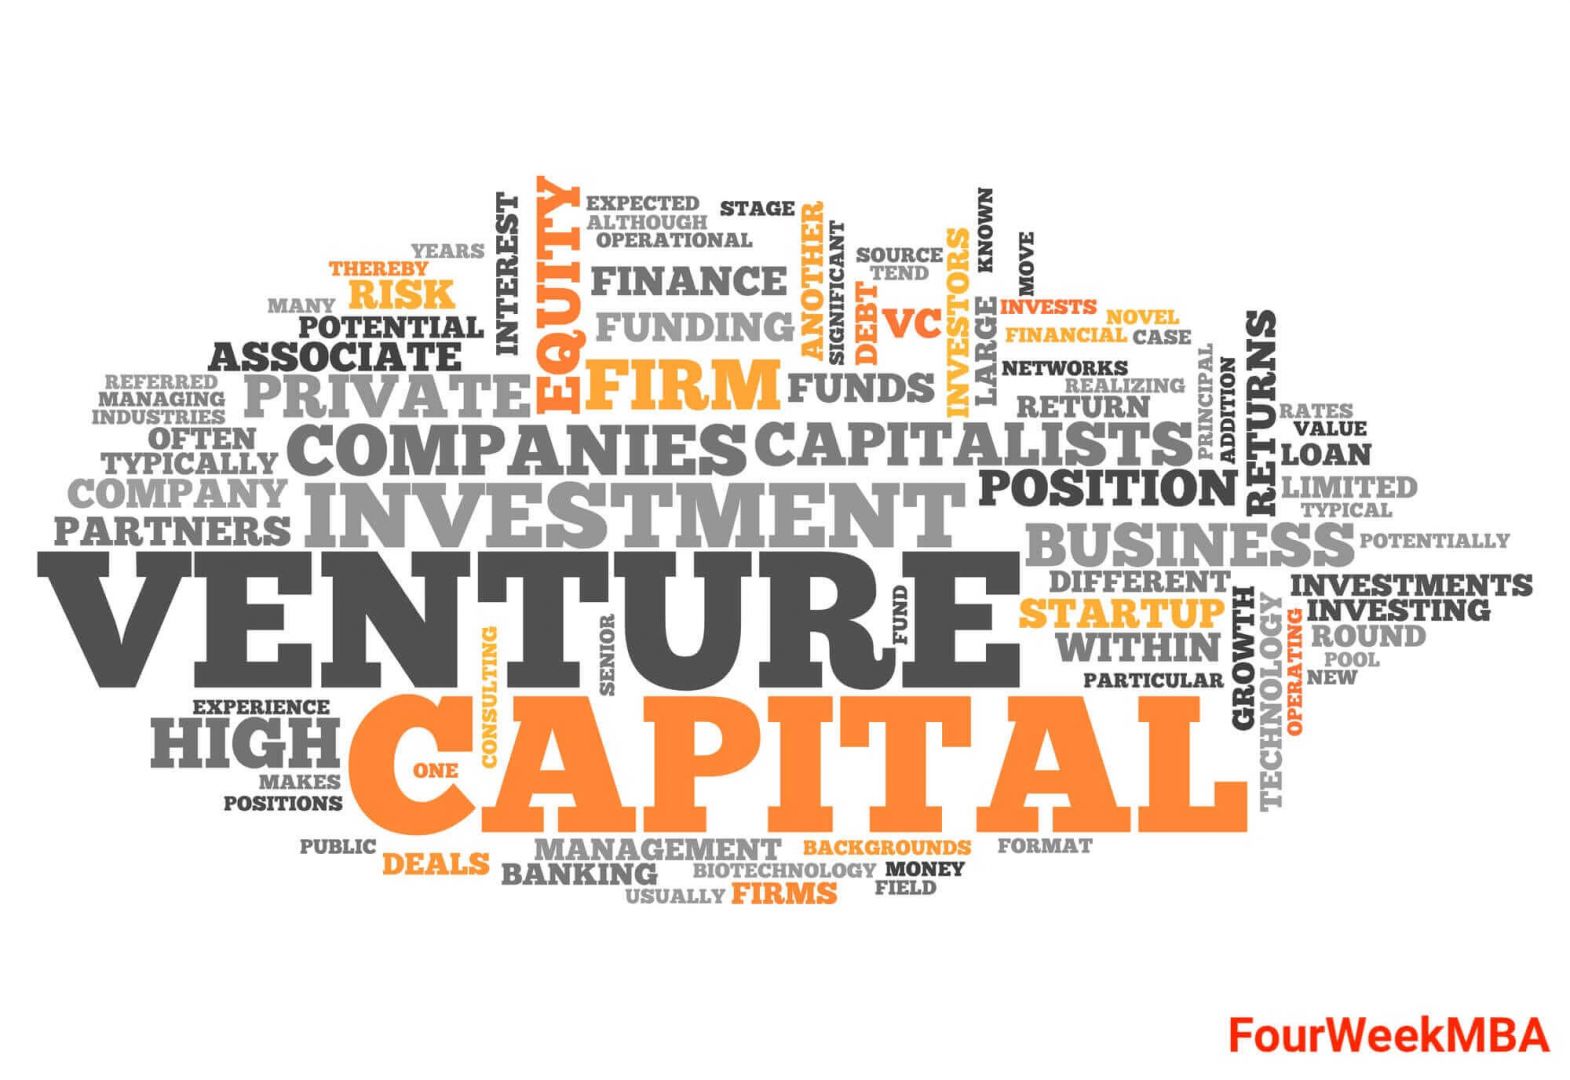 The Sequoia Fund: Patient Capital for Building Enduring Companies